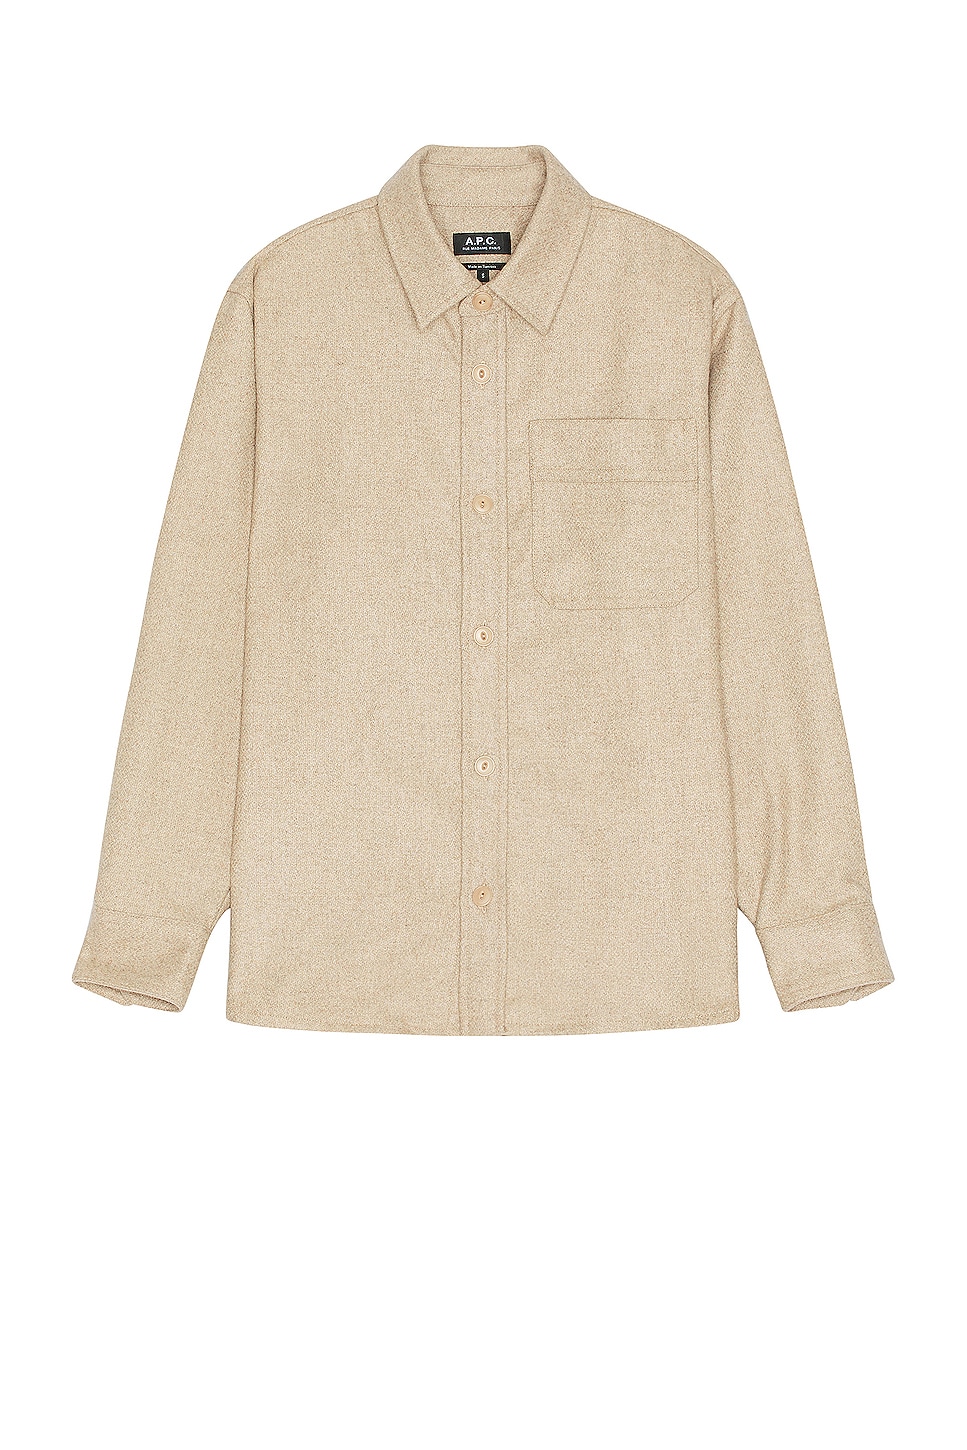 Image 1 of A.P.C. Basile Shirt in Heathered Beige